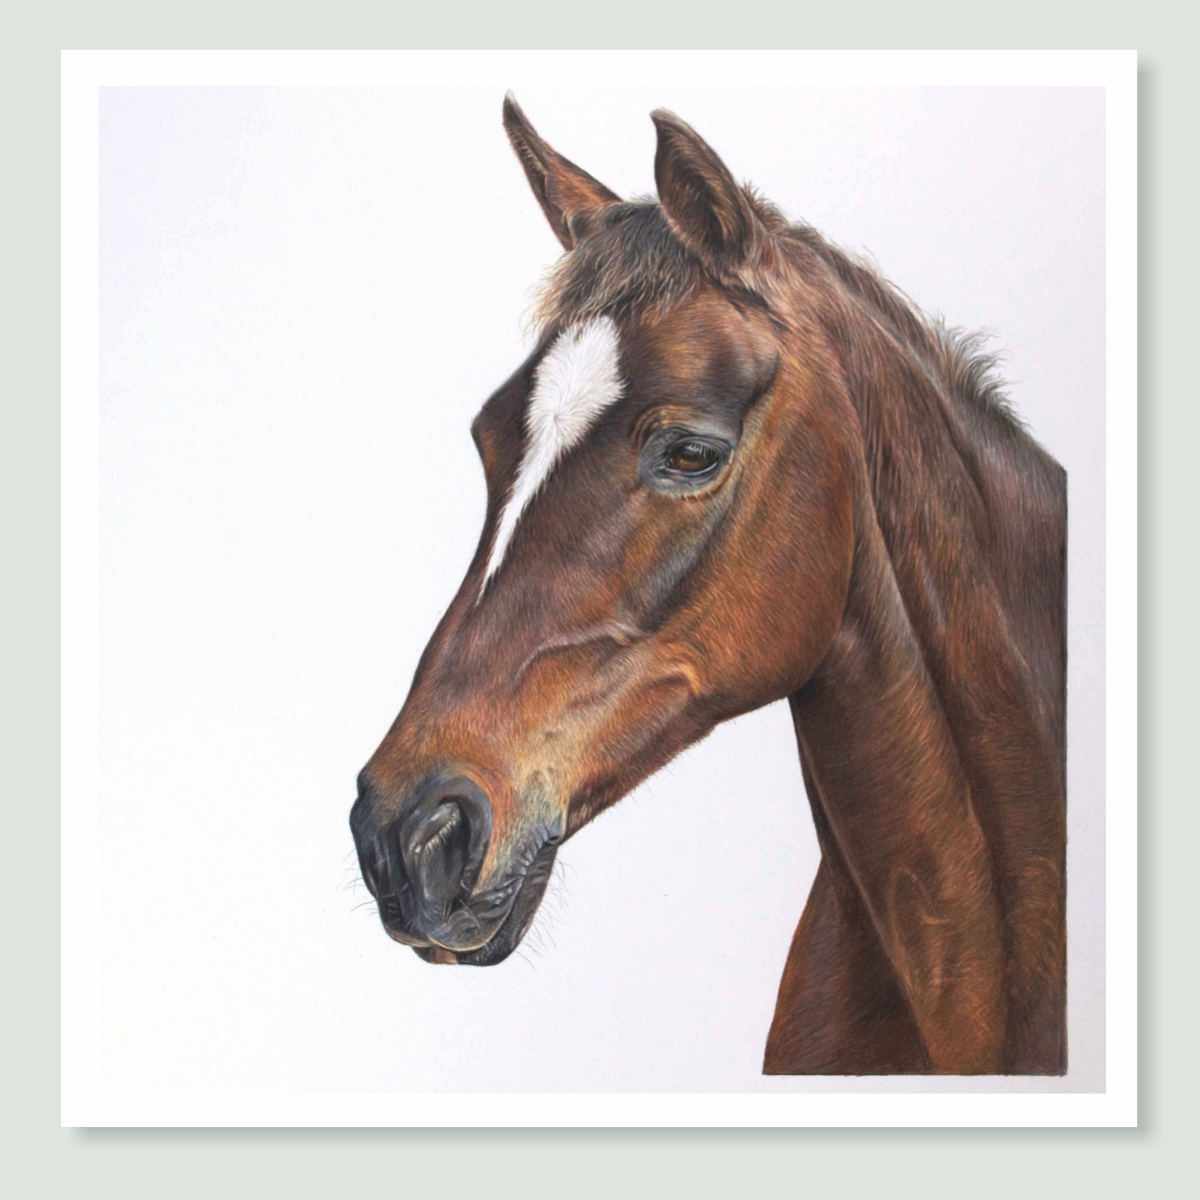 Absolutely Fabulous - coloured pencil horse portrait by pet artist Angie.